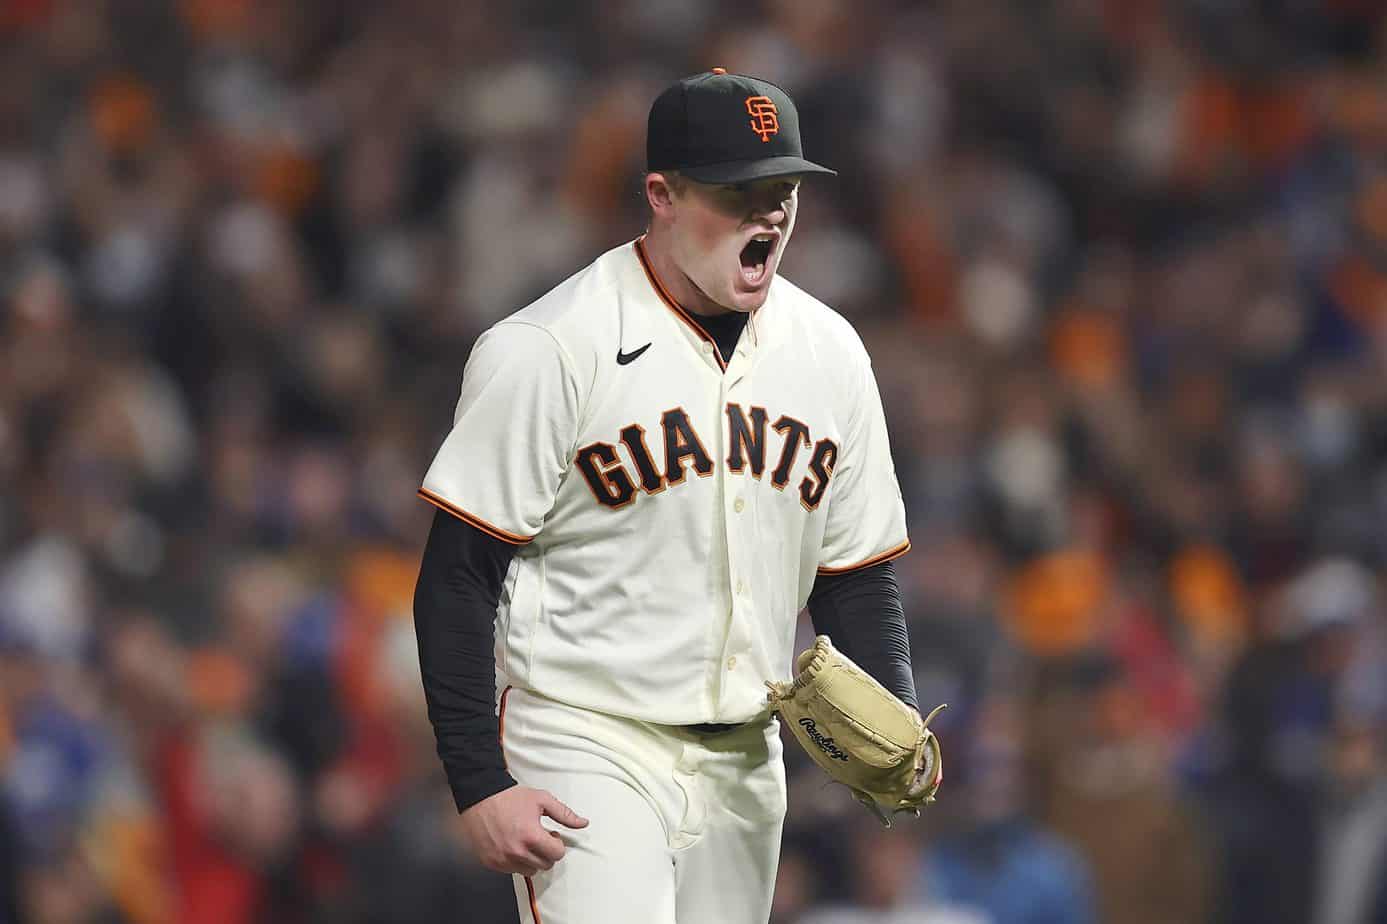 San Francisco Giants pitcher Logan Webb reveals an insane pregame ritual he does involving Red Bull prior to his massive Game 5 start on Thursday